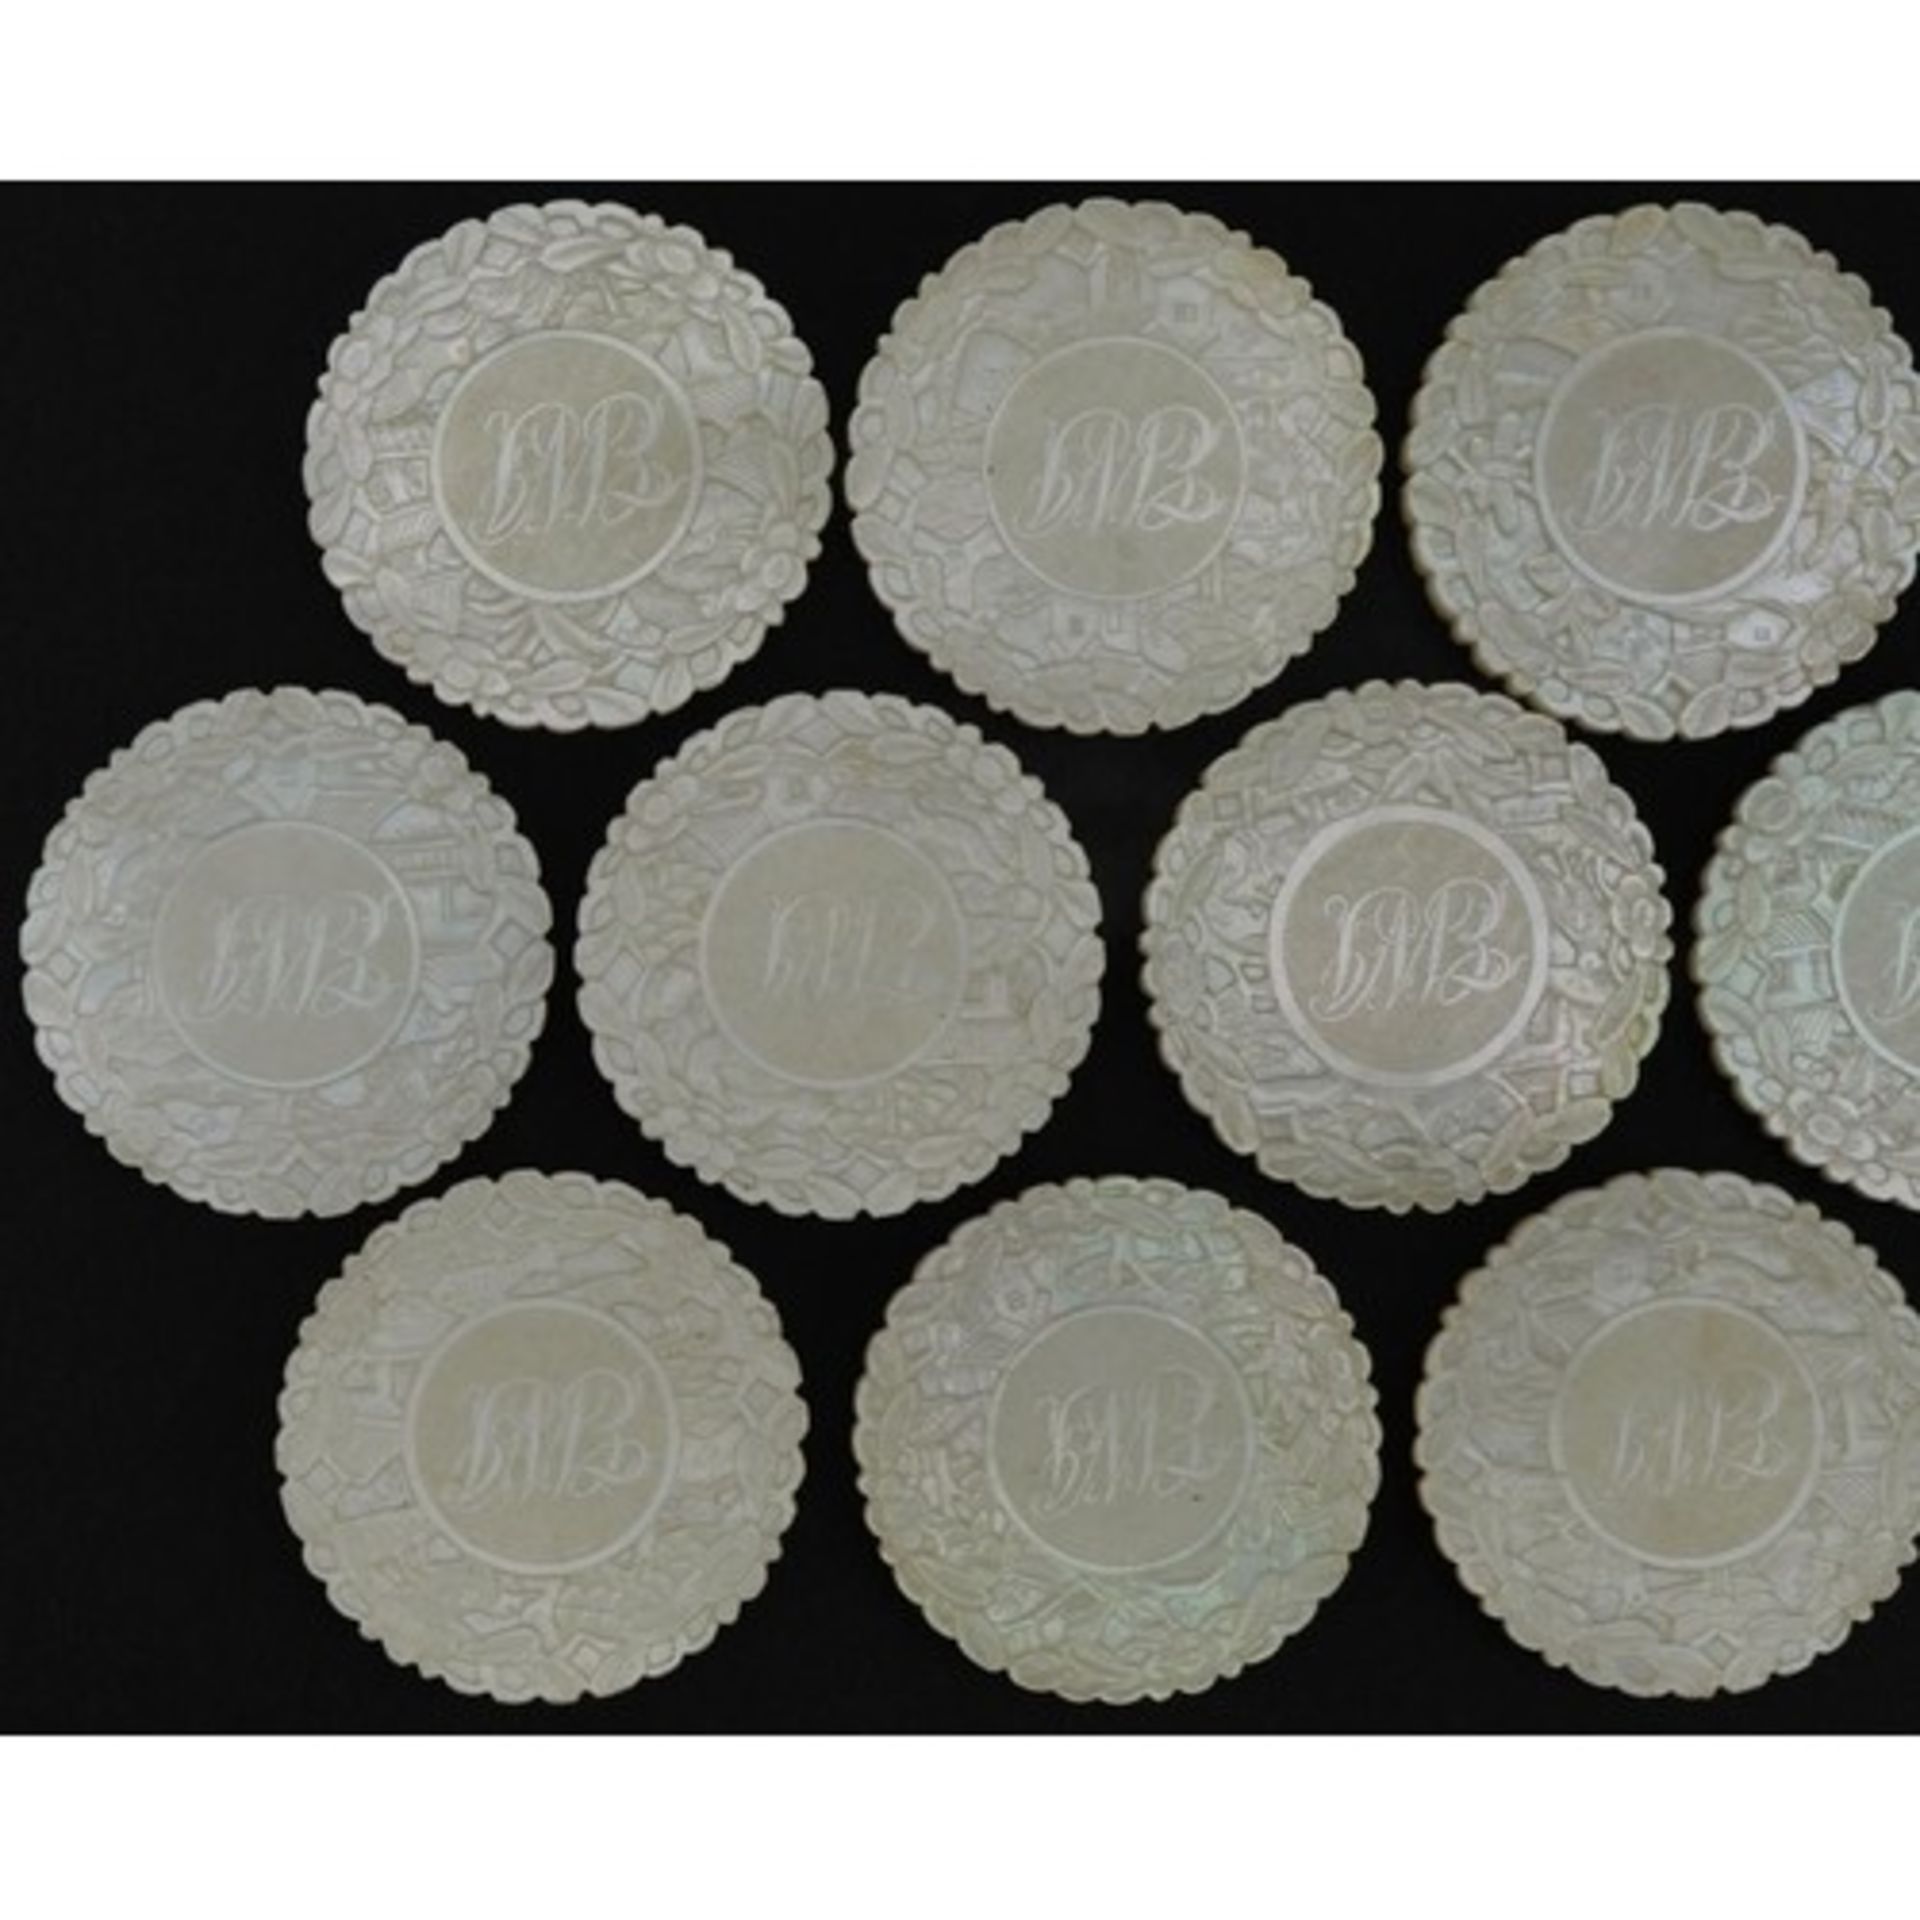 Ten good Chinese Canton mother of pearl gaming counters finely carved with figures amongst - Image 11 of 18